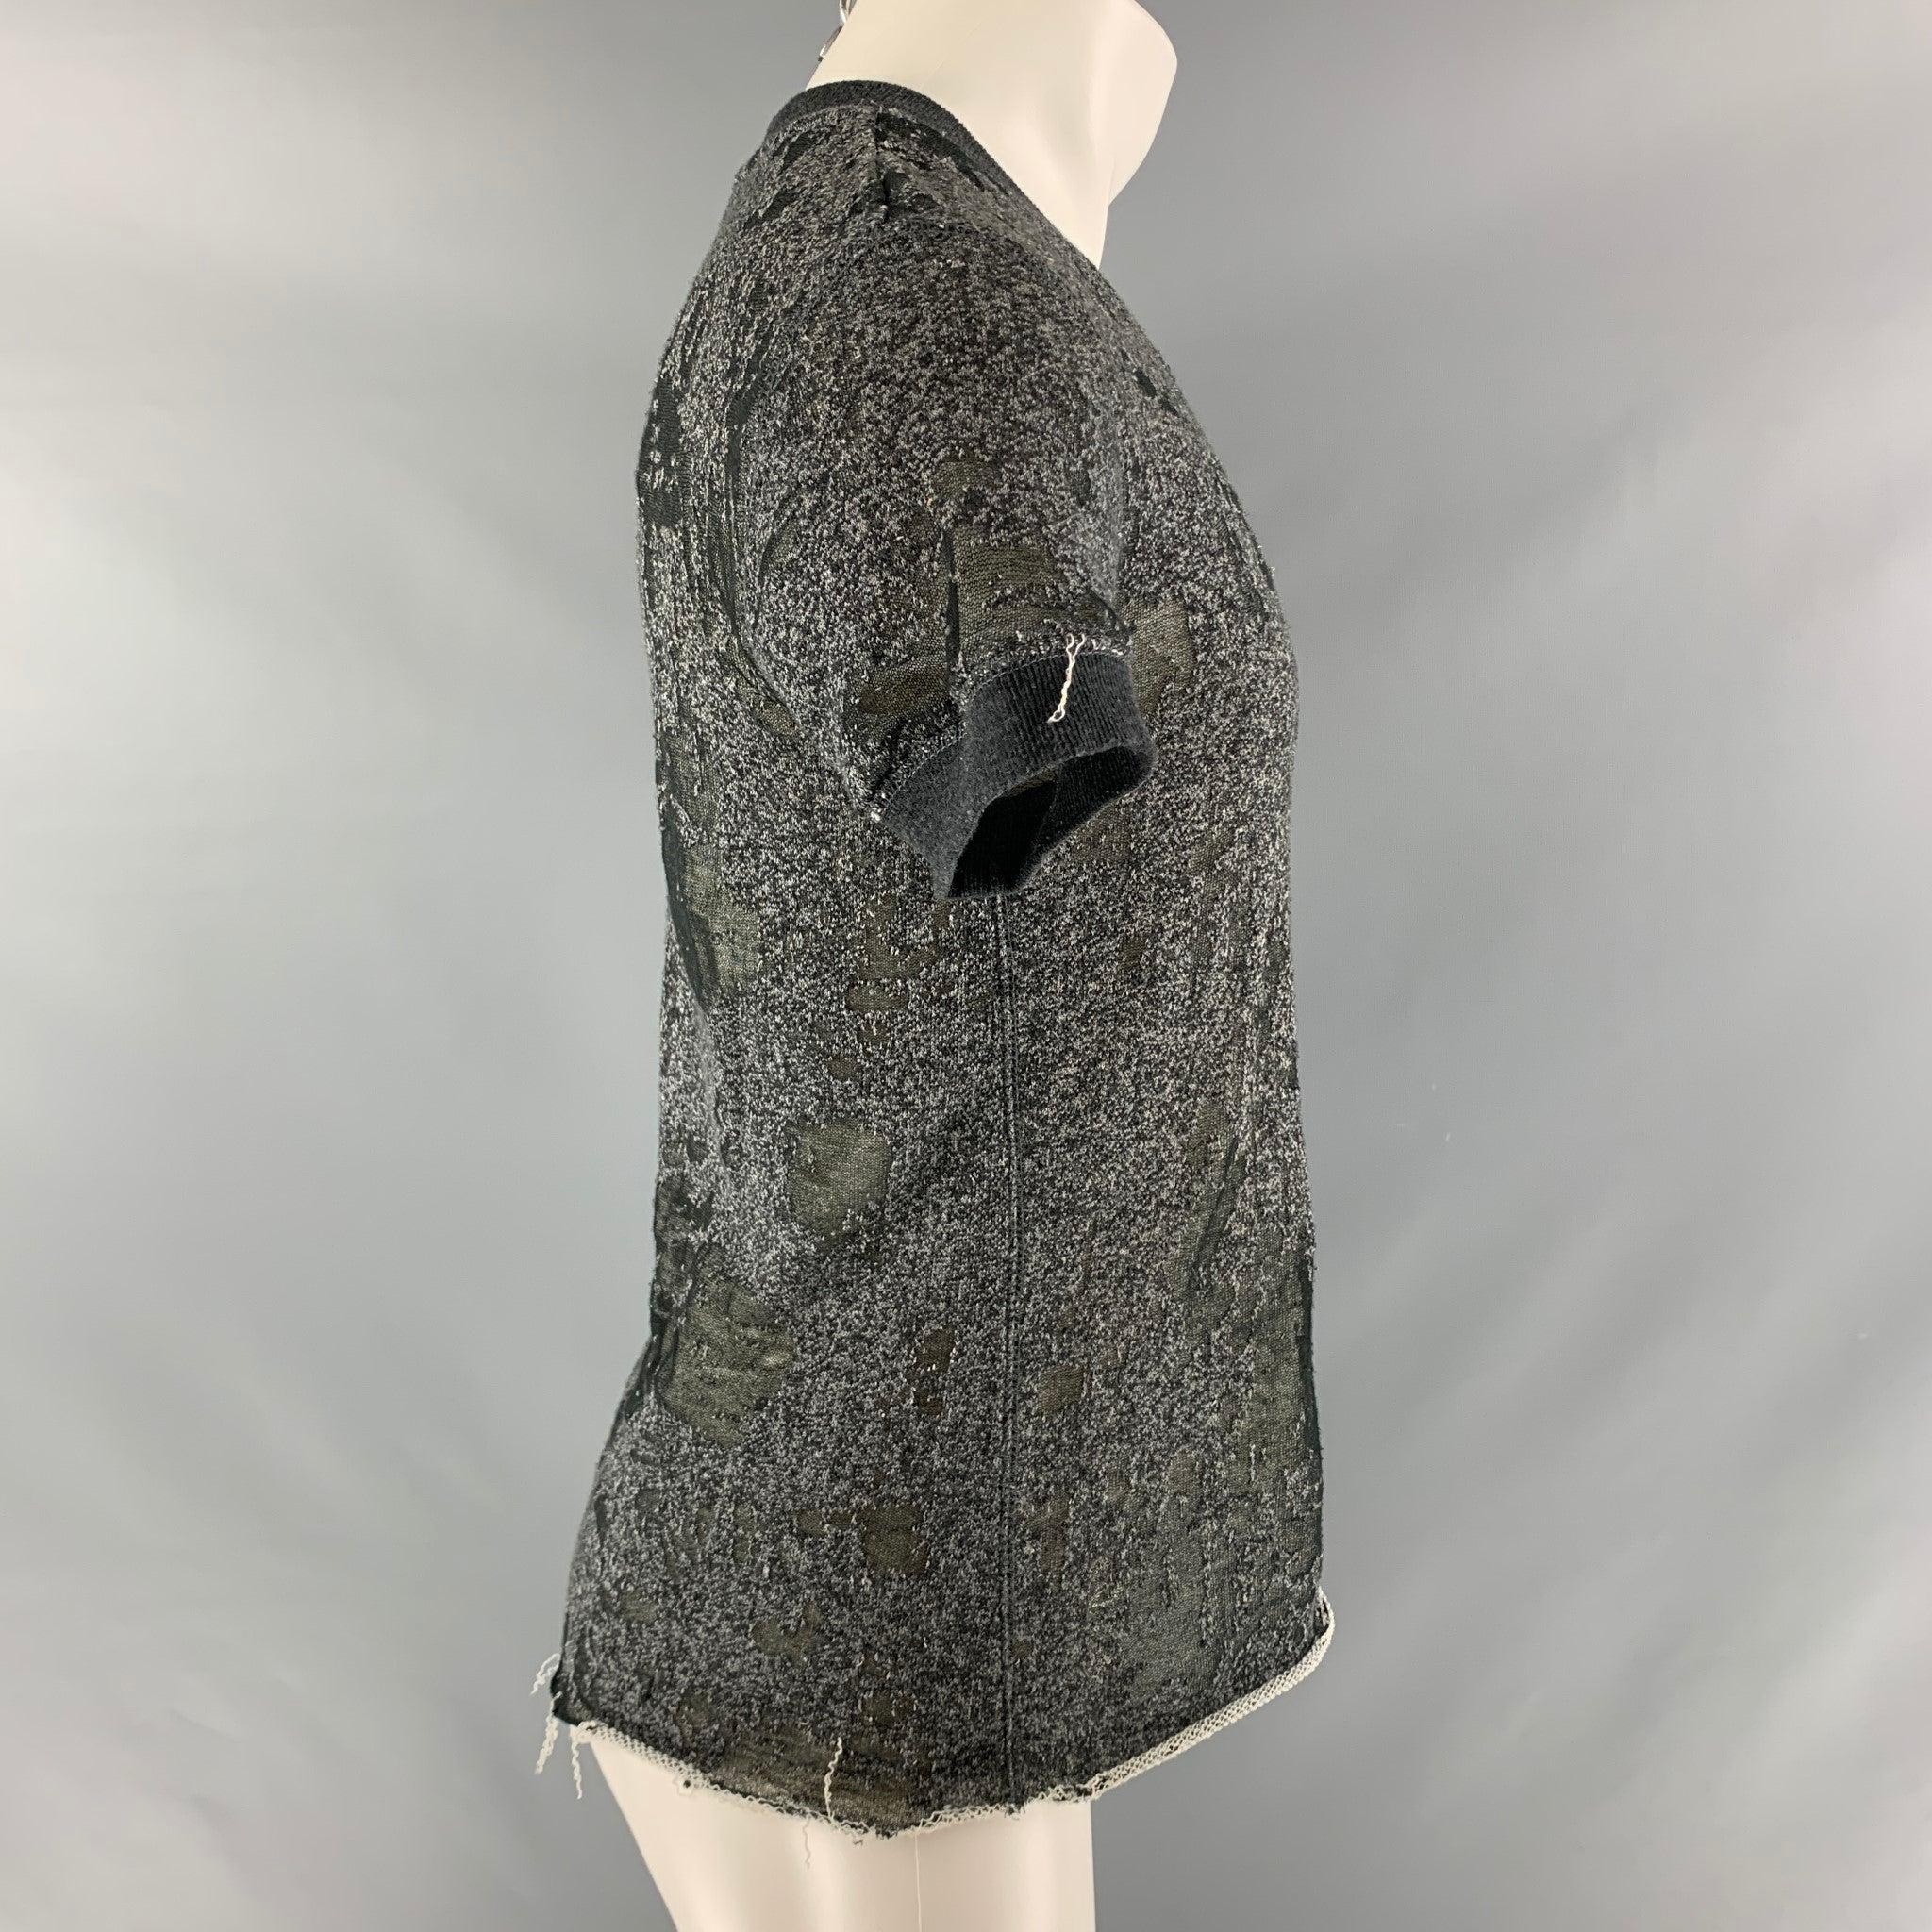 IRO JEANS T-shirt comes in dark gray cotton french terry knit featuring a crew neck, raw hem, and distressed style. Excellent Pre-Owned Condition. 

Marked:   XS 

Measurements: 
  
Shoulder: 18.5 inches Bust: 44 inches Sleeve: 7 inches Length: 26